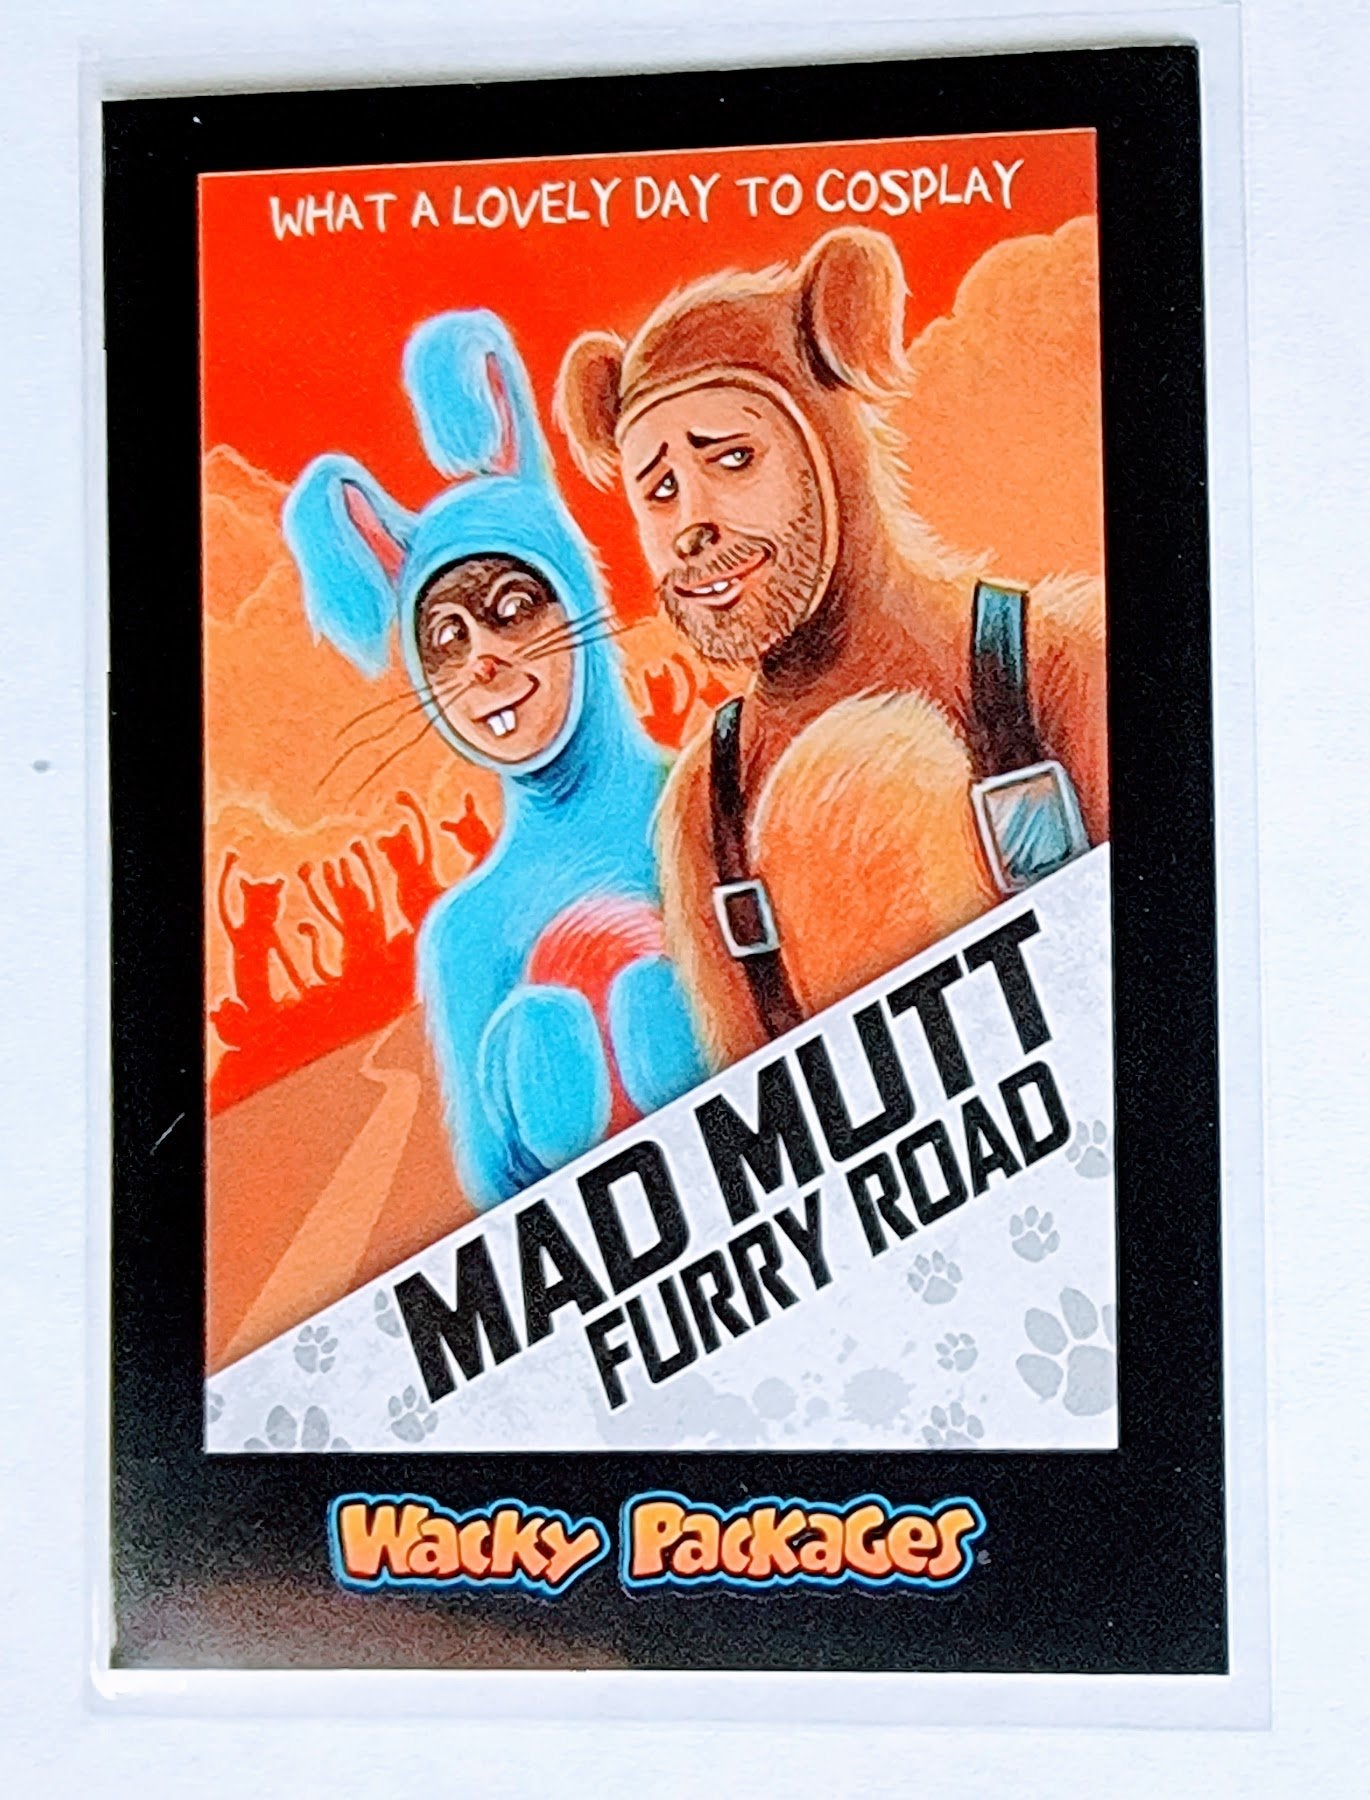 2017 Wacky Packages 50th Anniversary Mad Mutt Furry Road Sticker Trading Card MCSC1 simple Xclusive Collectibles   